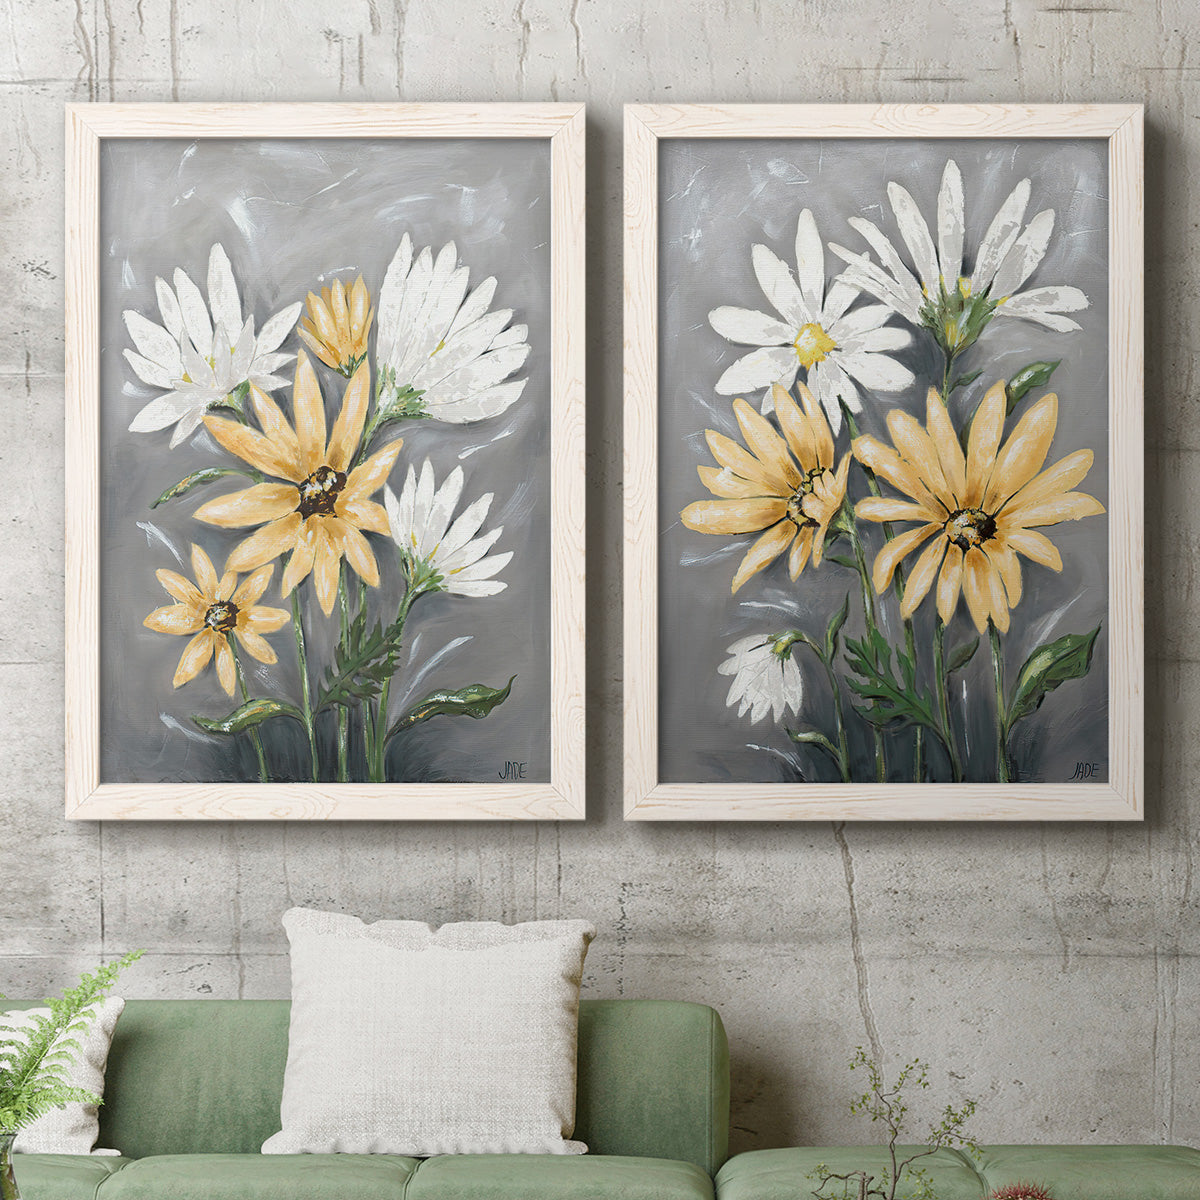 Summer Daisies I - Premium Framed Canvas 2 Piece Set - Ready to Hang